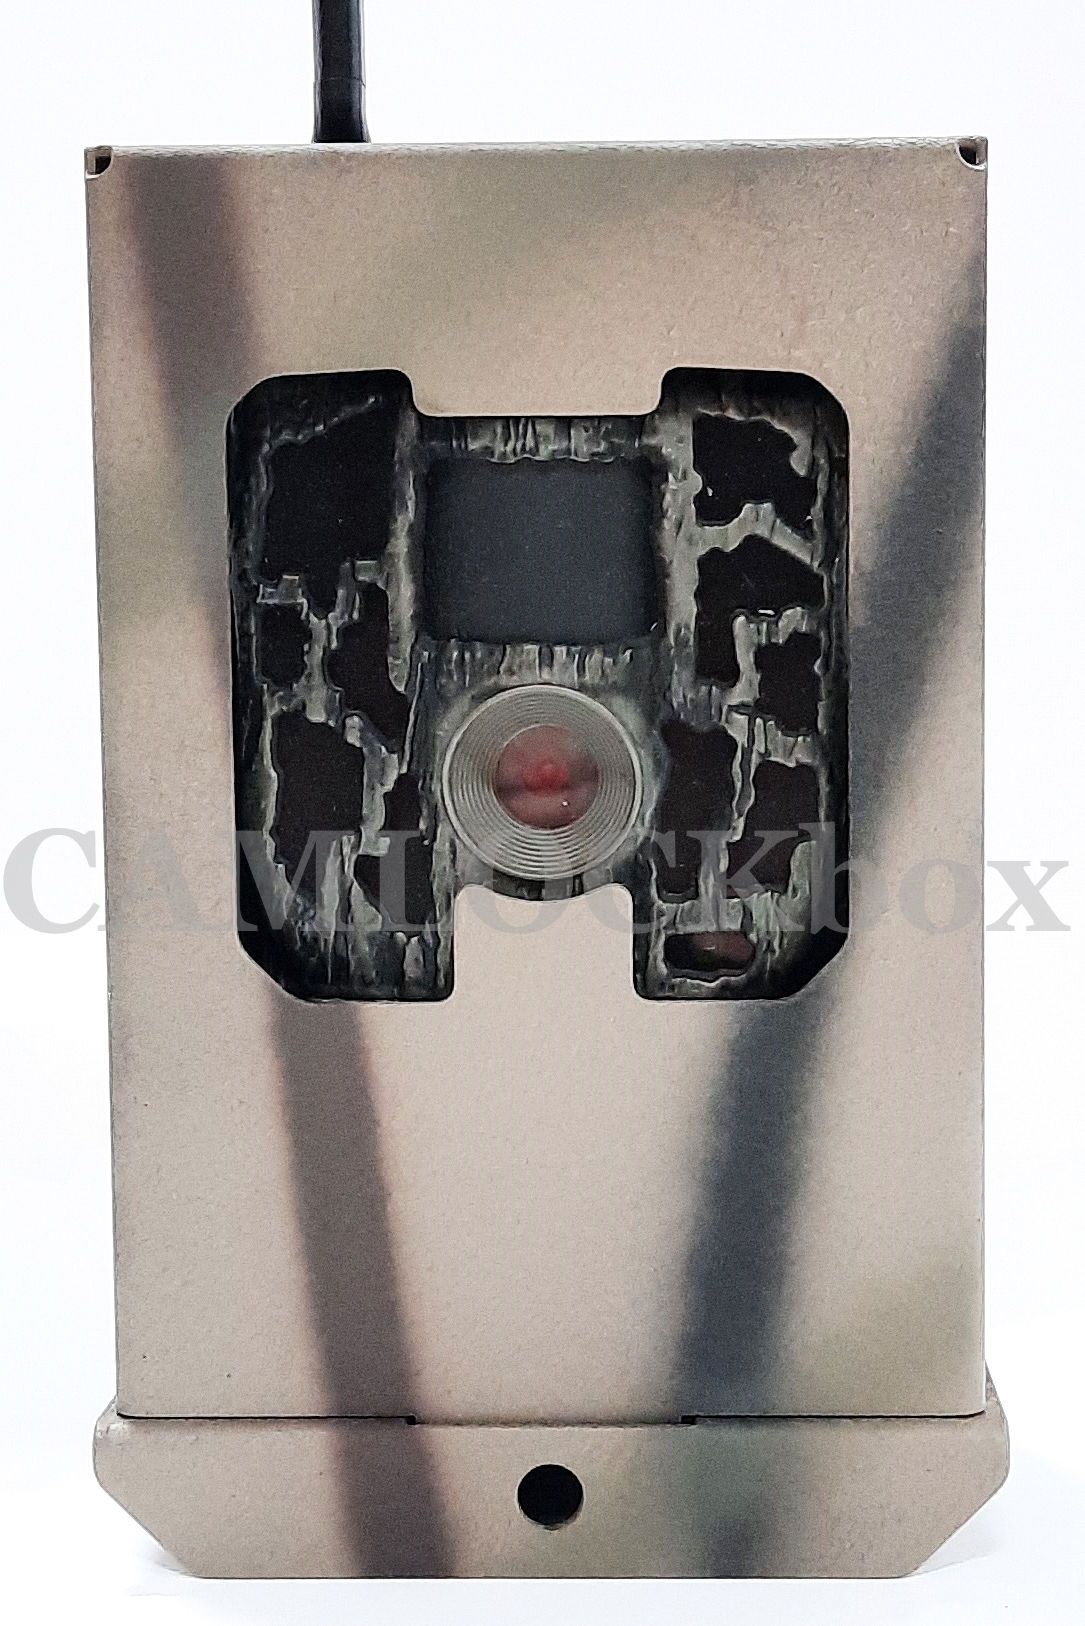 Camlockbox Stealth Cam G Series Security Box for Stealth Cam No Glo Game Camera 